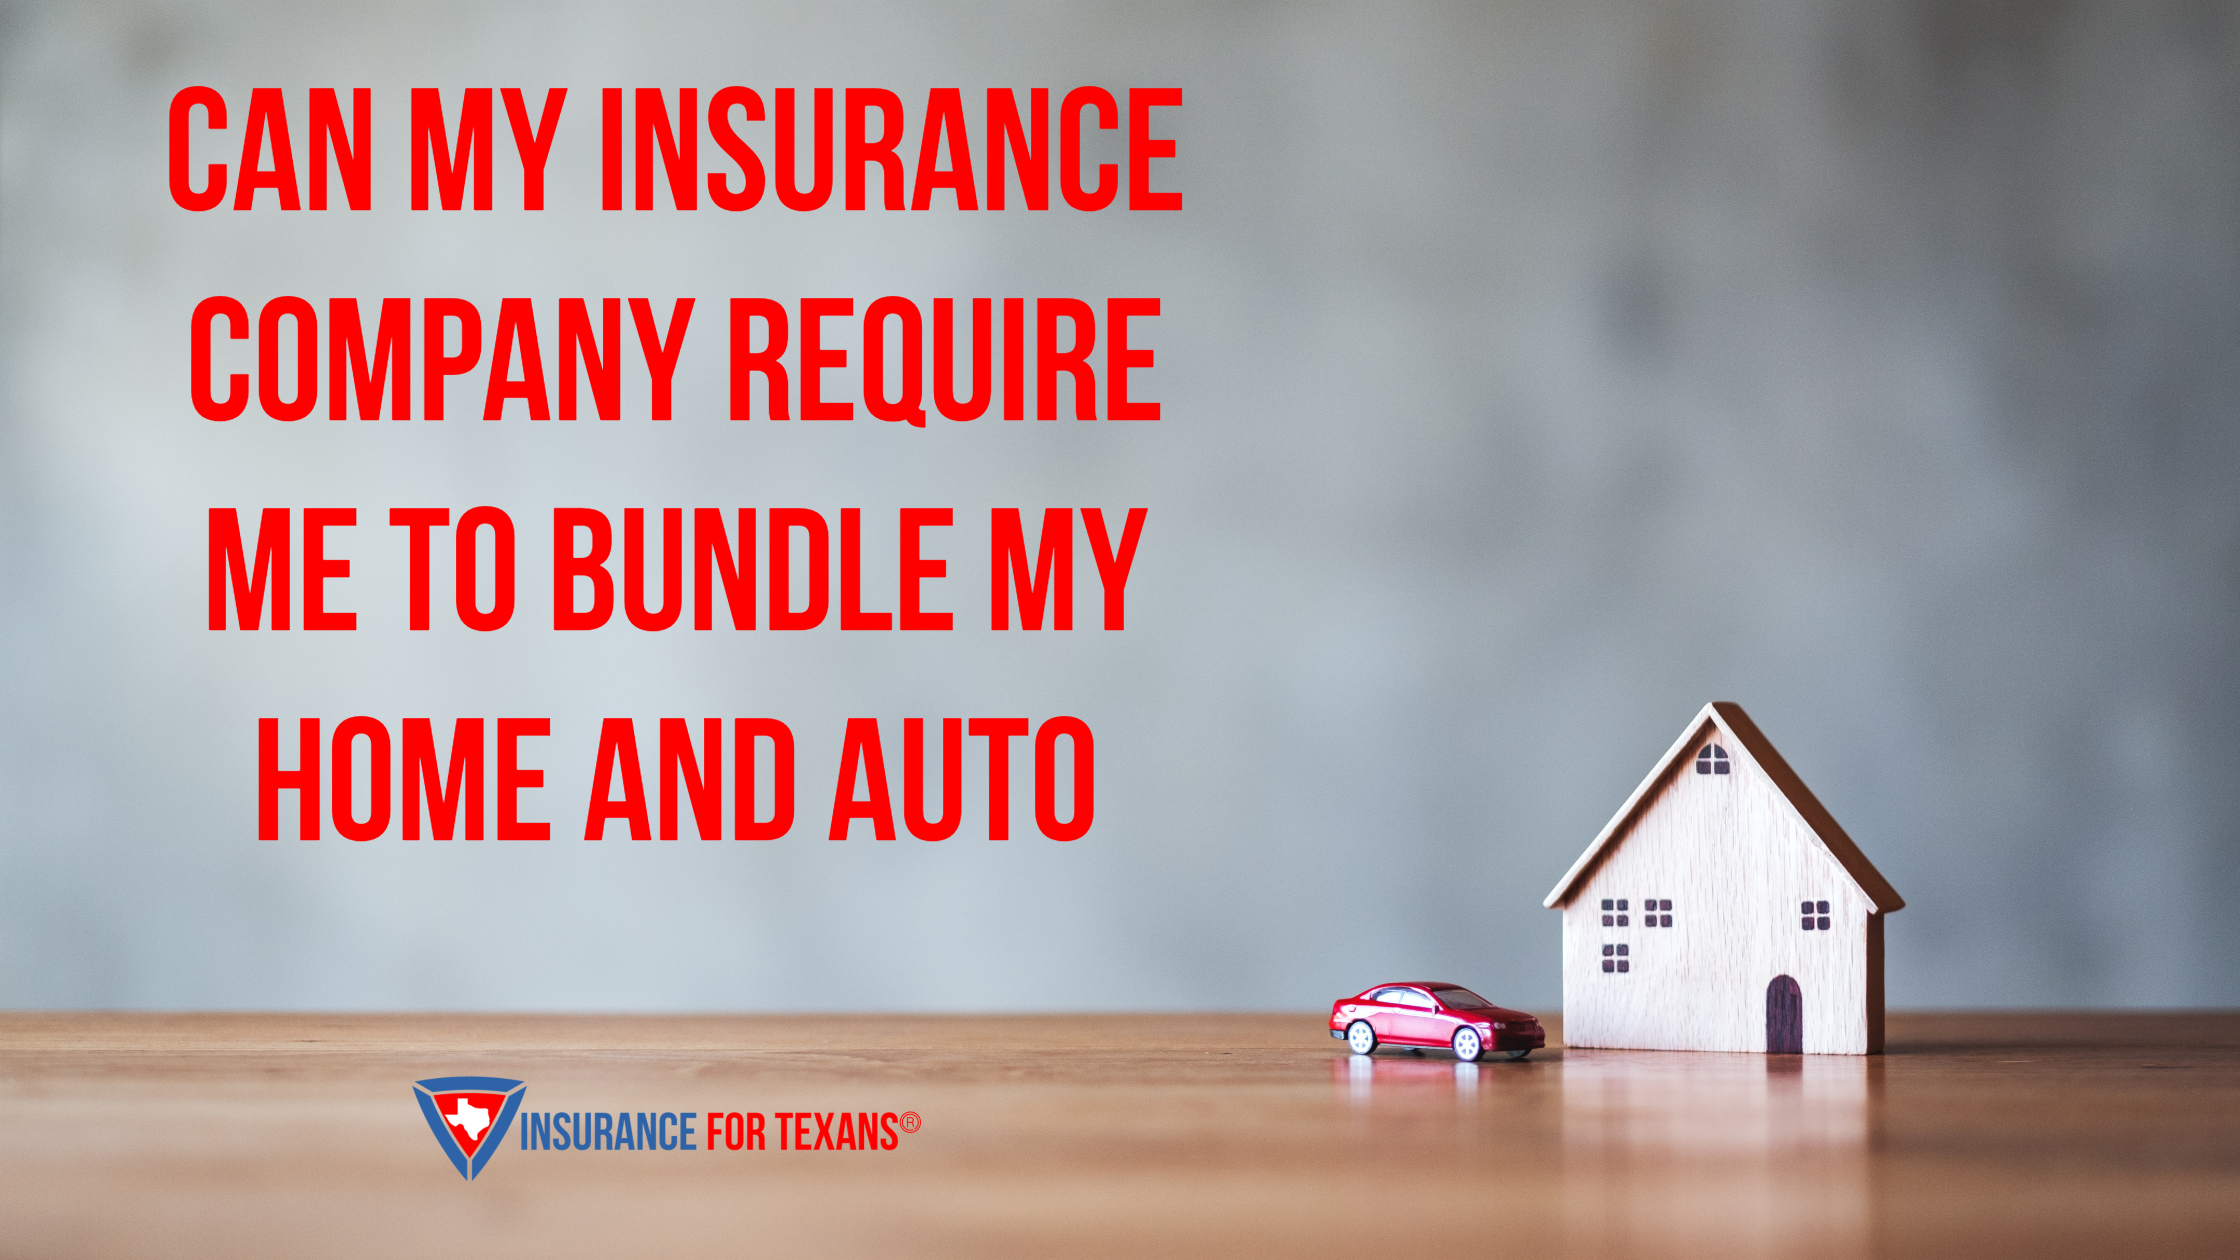 Can My Insurance Company Require Me To Bundle My Home And Auto